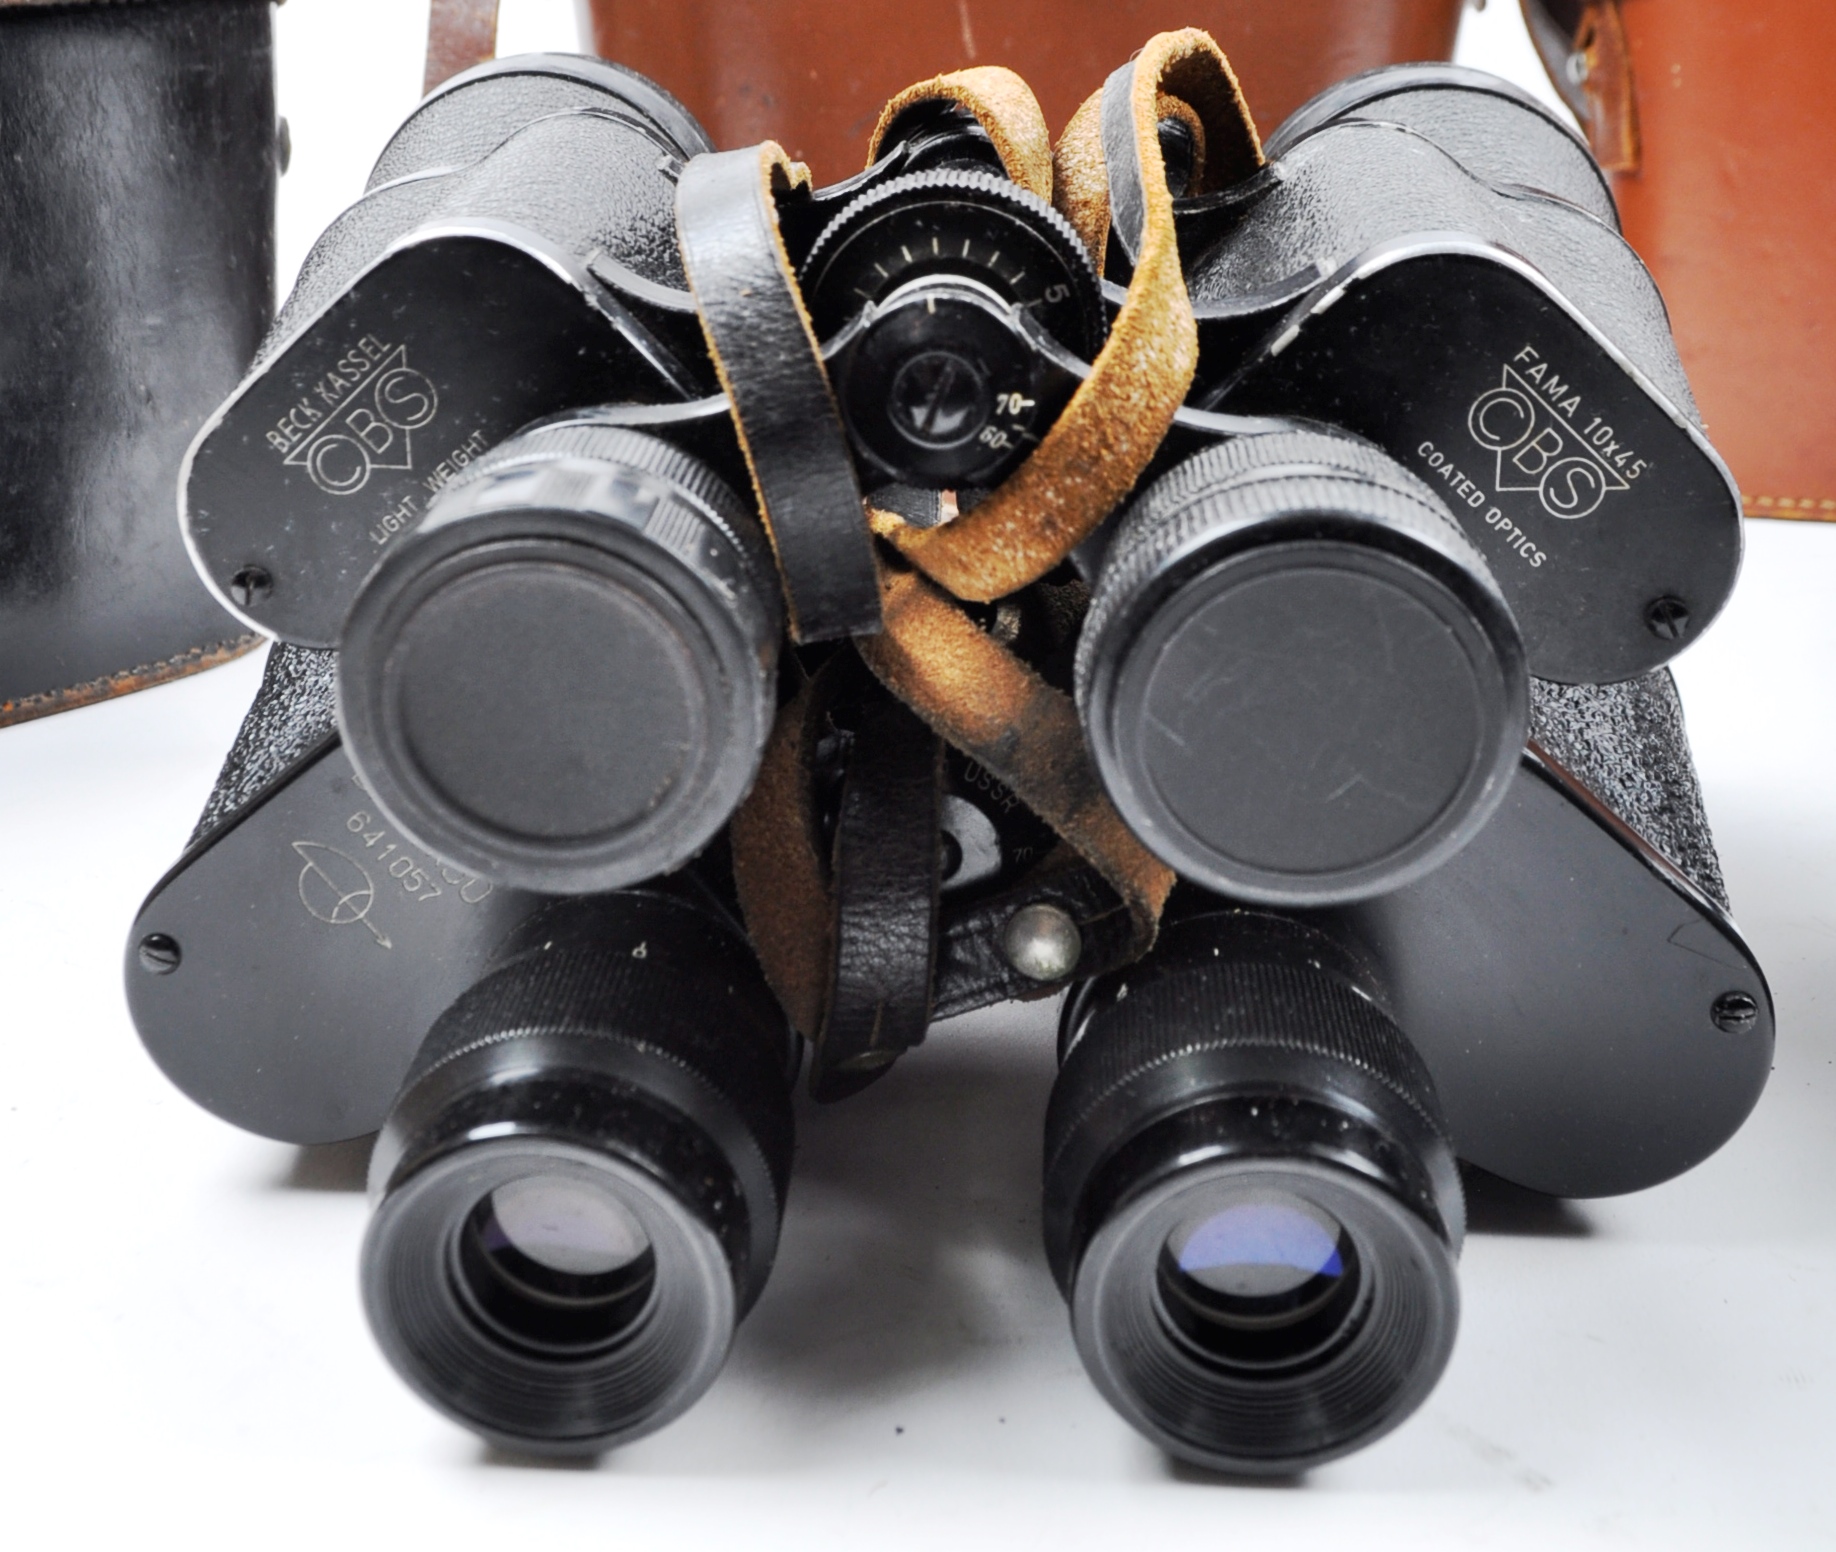 COLLECTION OF ASSORTED CASED VINTAGE BINOCULARS INCLUDING MILITARY ISSUE - Image 3 of 5